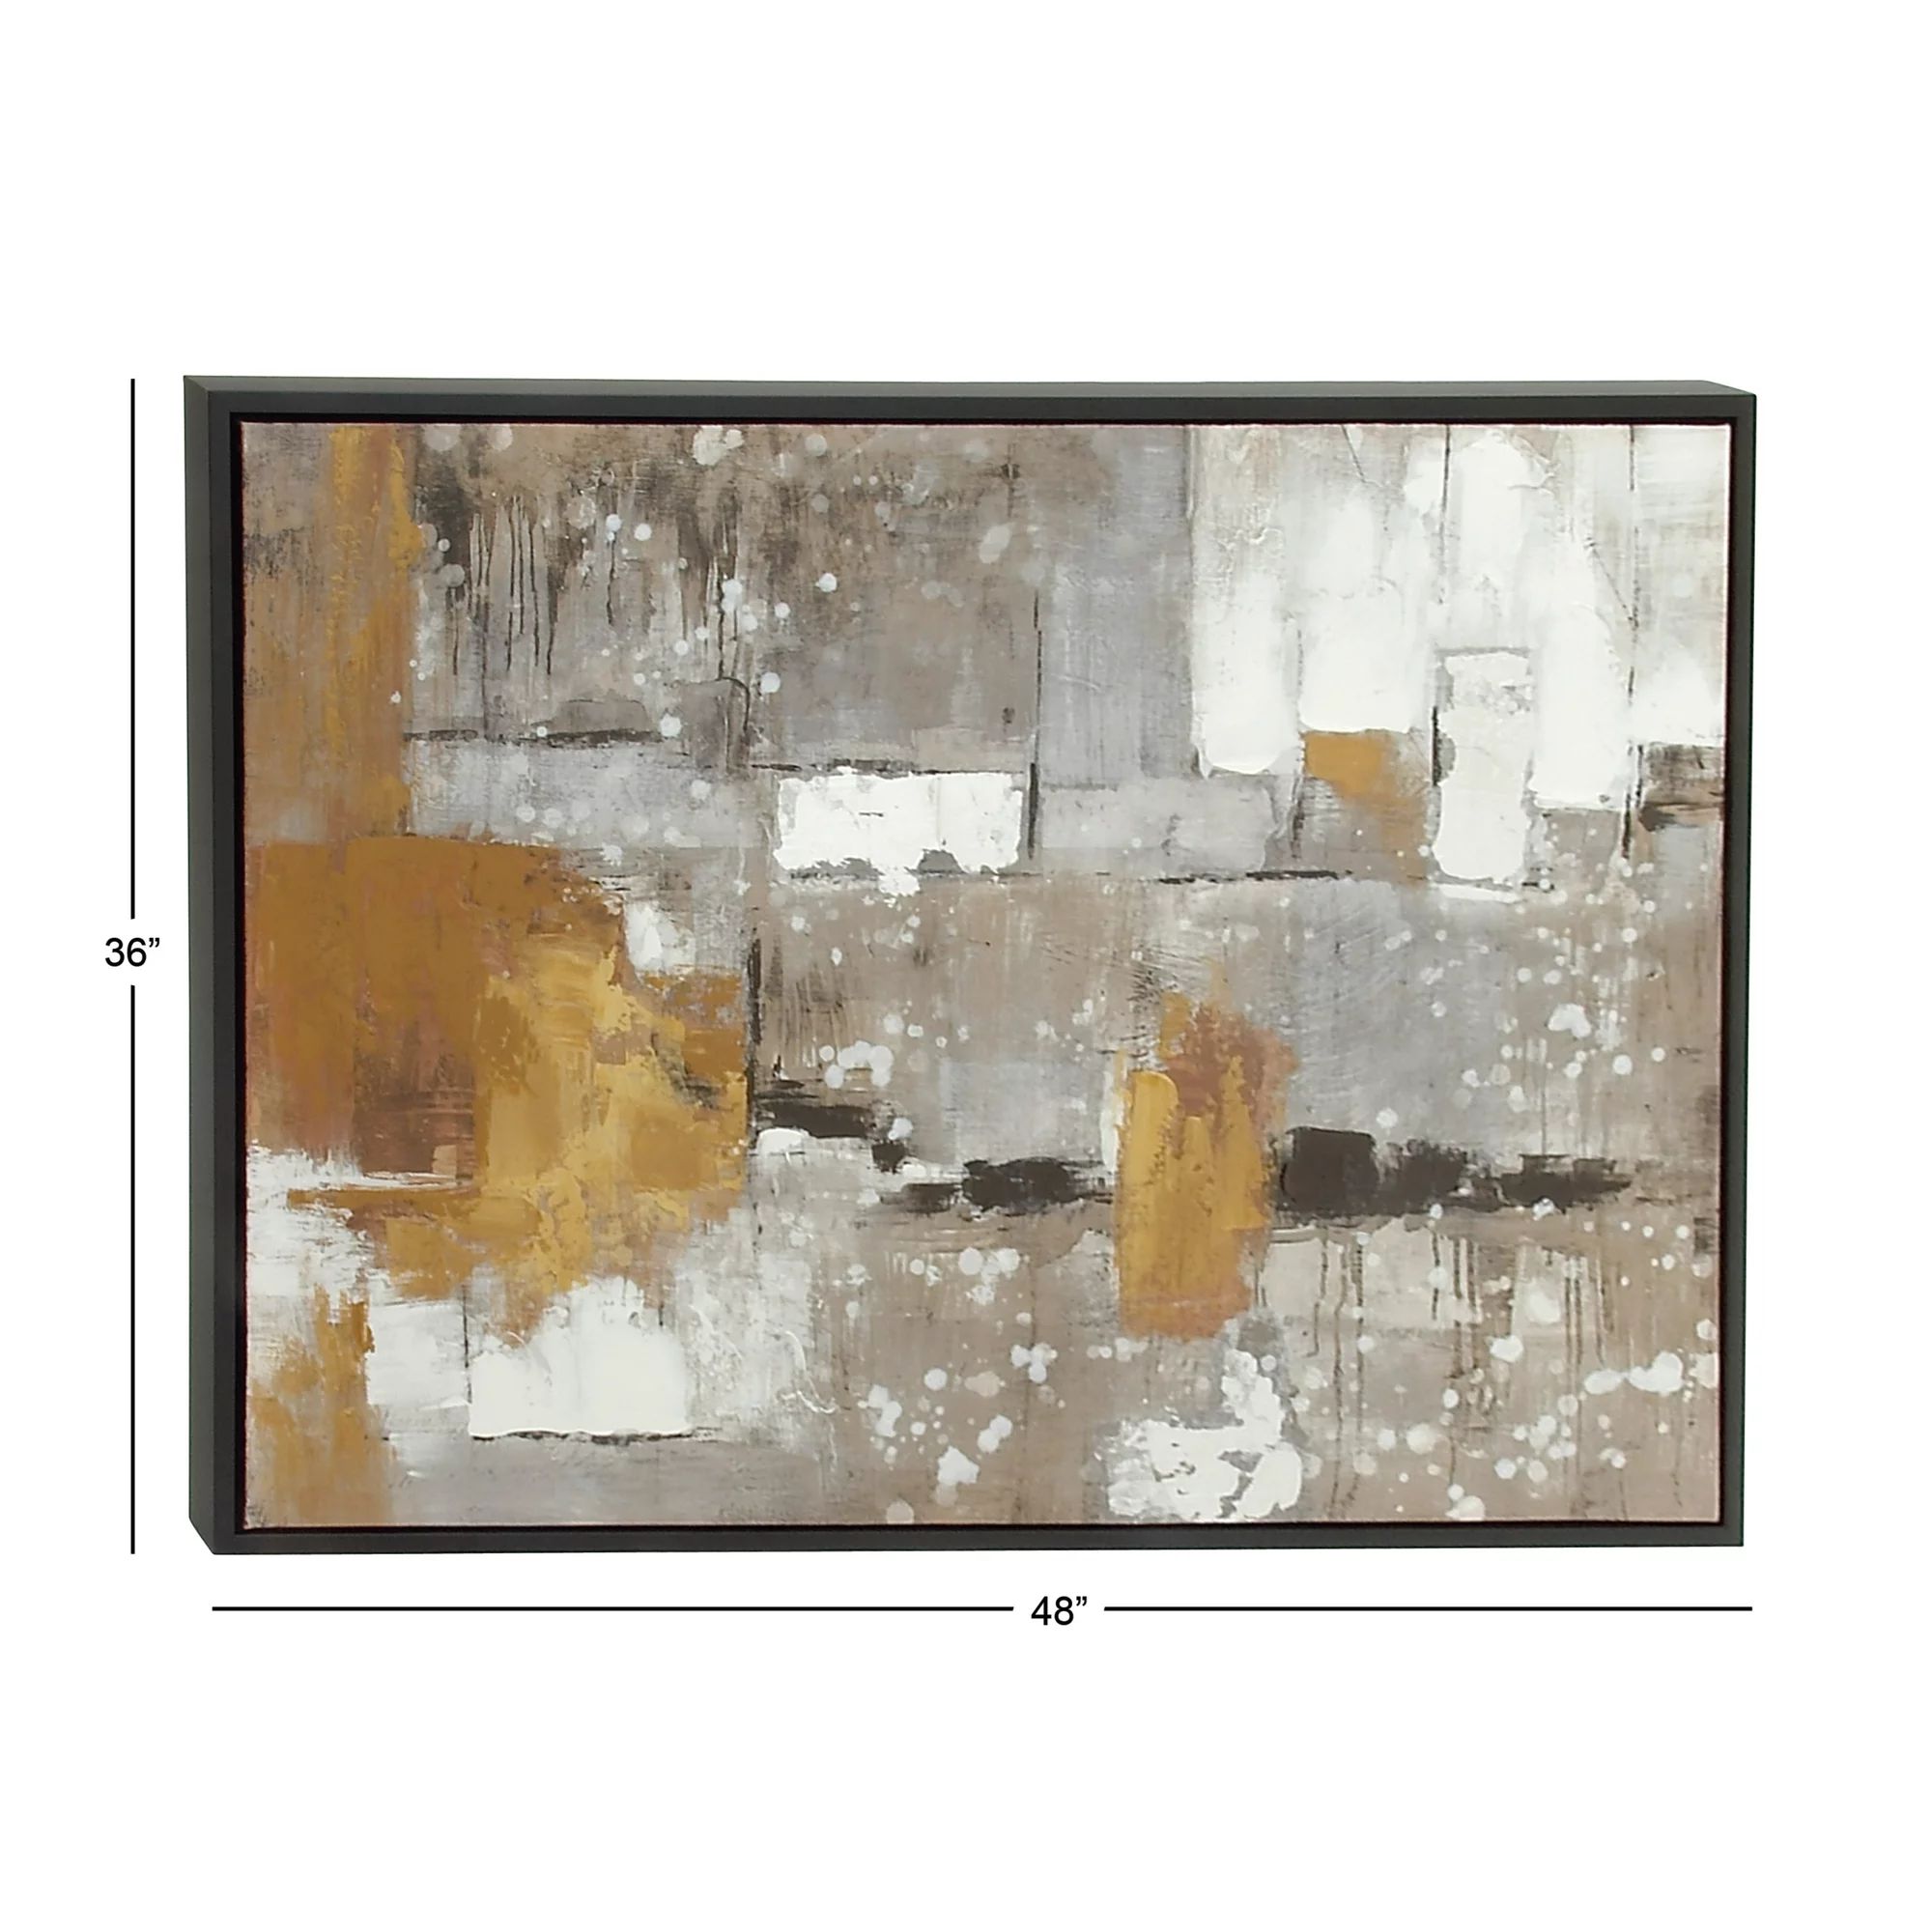 48" x 36" Abstract Framed Wall Art with Black Frame, by DecMode | Walmart (US)